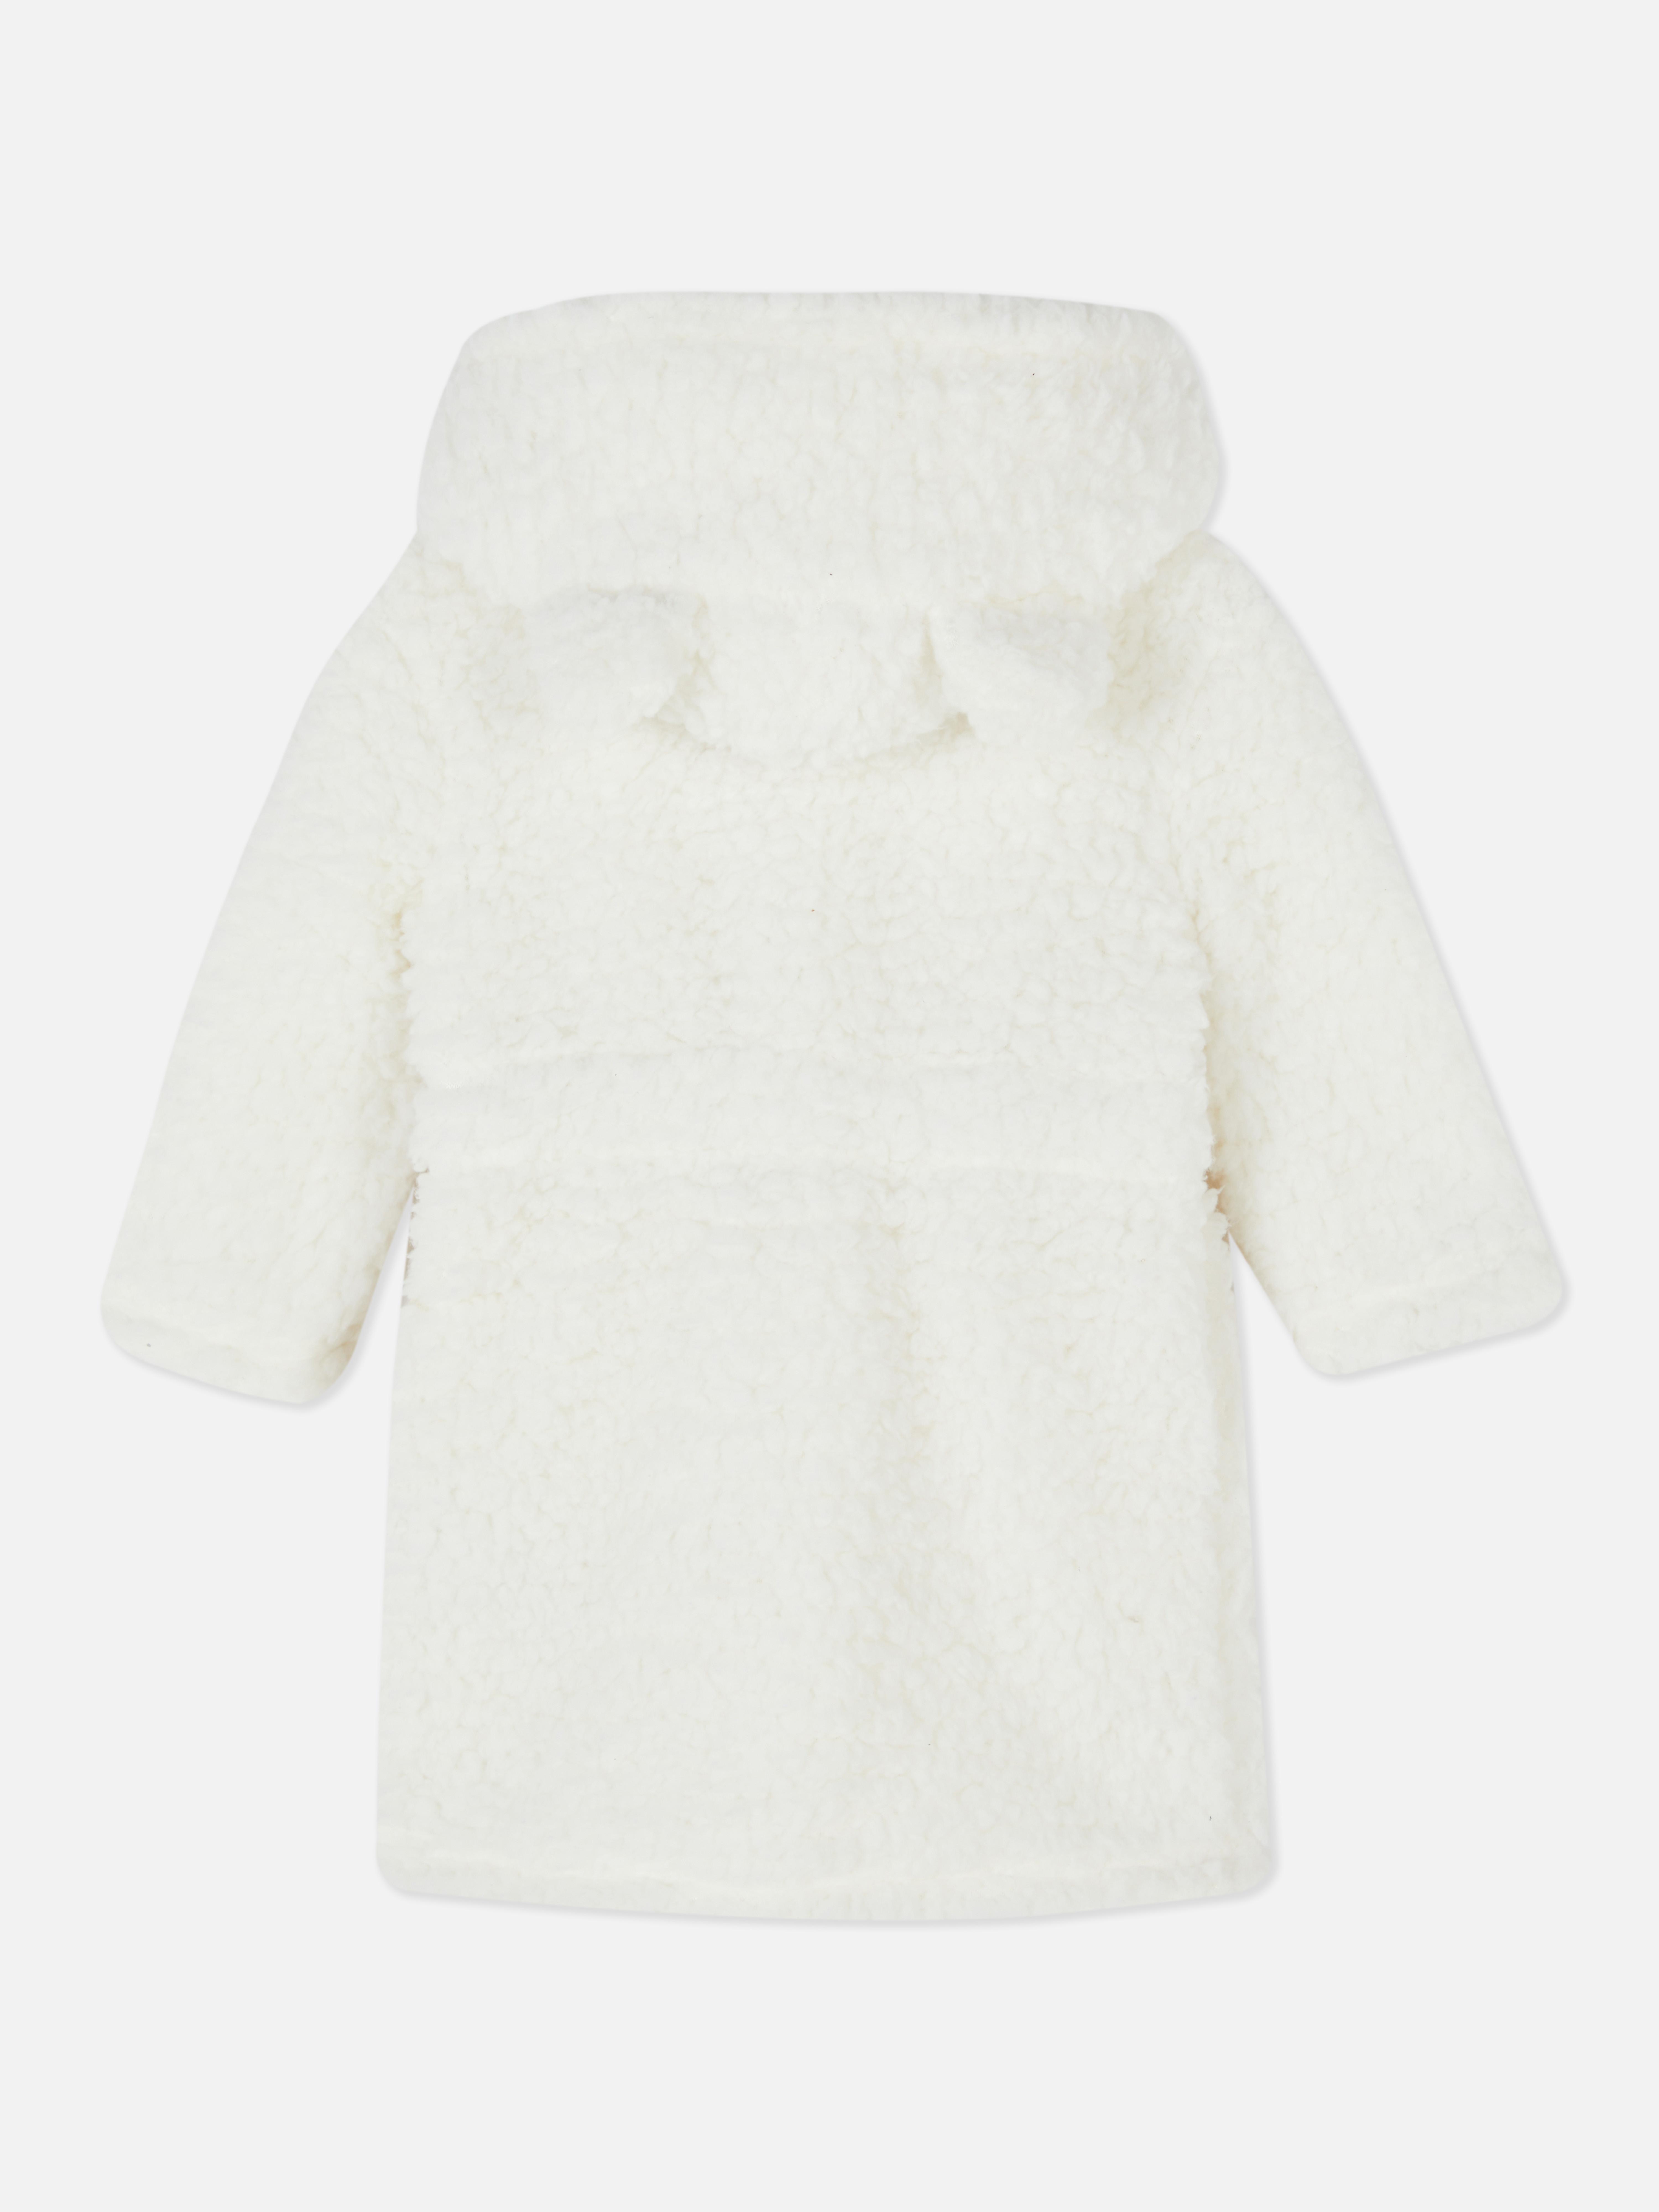 Stacey Solomon Borg Dressing Gown and Bear